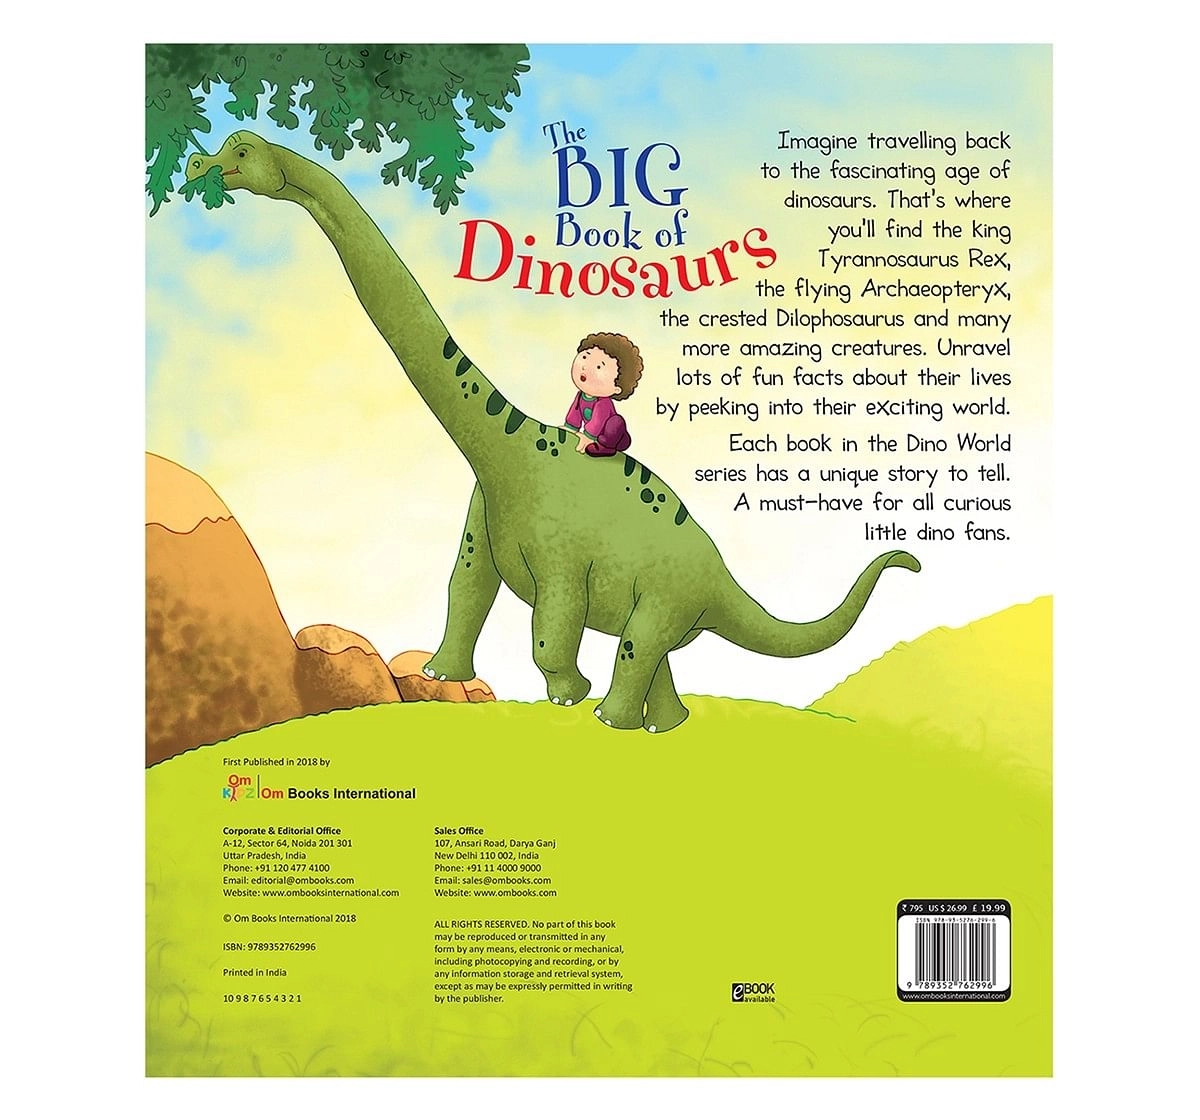 Dinosaurs : The Big Book of Dinosaurs, 160 Pages, Hardback